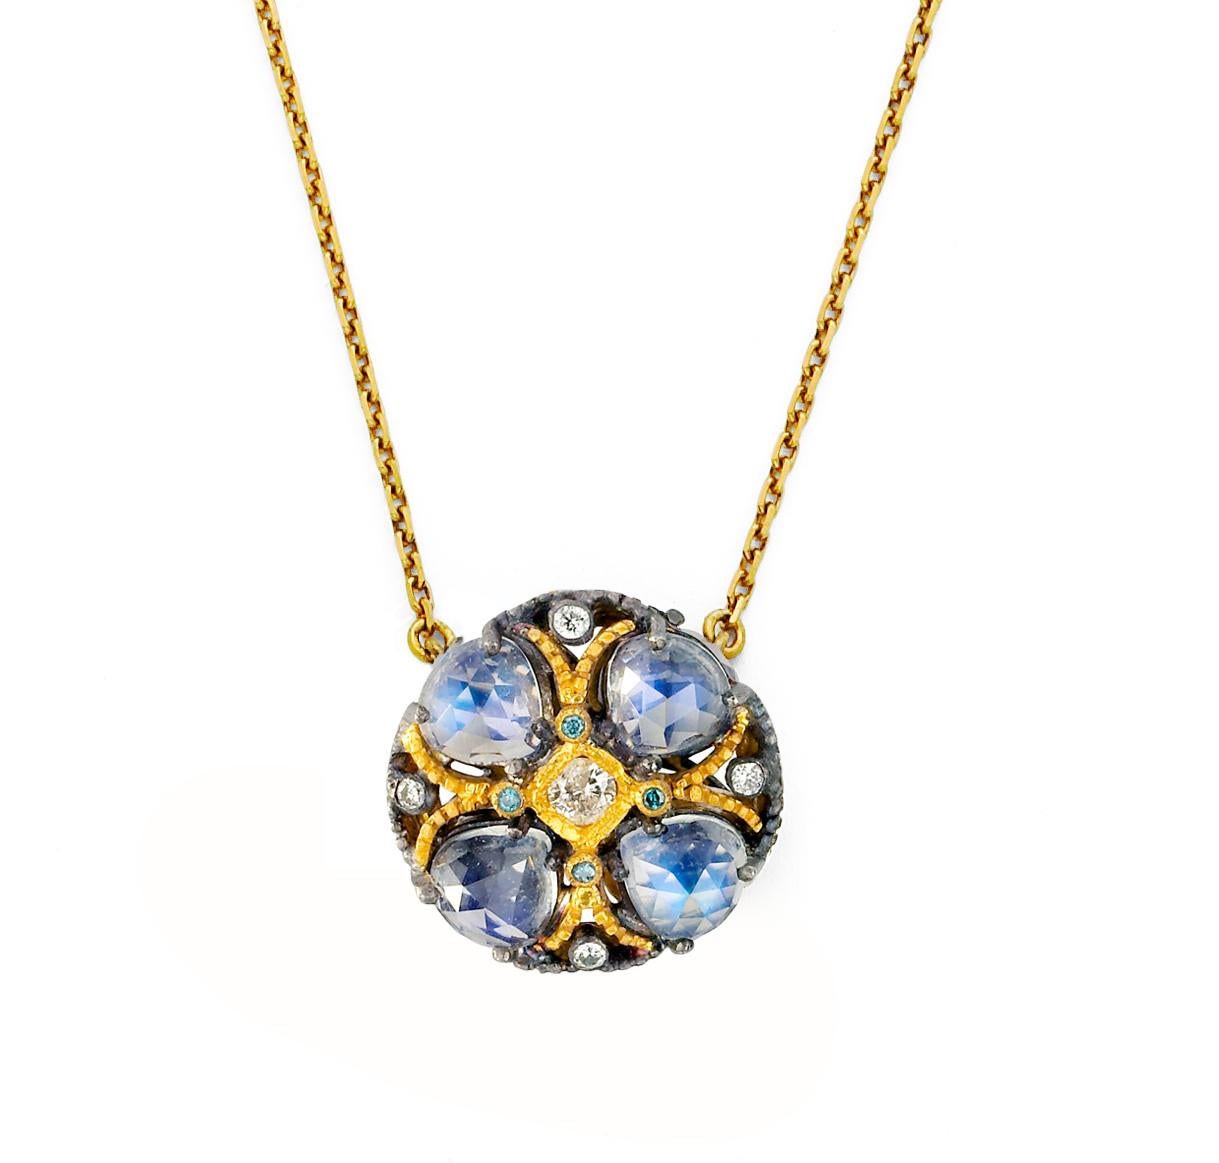 Blackened silver and 18K gold poppy flower shaped pendant with rose cut Moonstone 3.00cts and Teal and White Diamonds 0.29cts and 14K yellow gold chain.

Moonstone’s unearthly glow is caused by light scattering between microscopic layers of